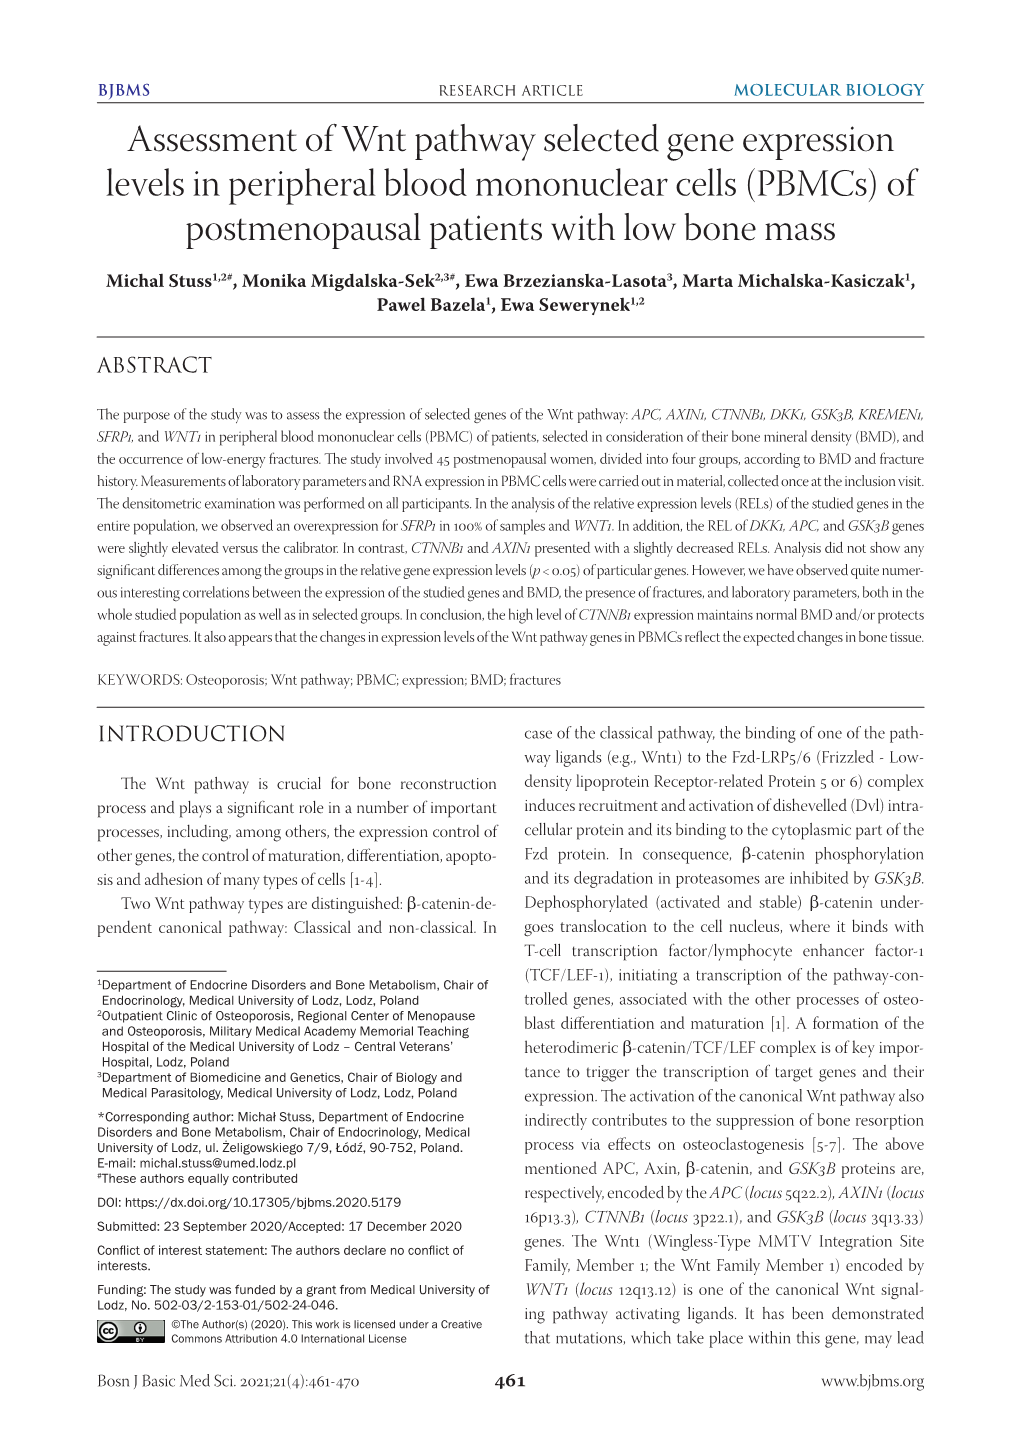 Assessment of Wnt Pathway Selected Gene Expression Levels in Peripheral Blood Mononuclear Cells (Pbmcs) of Postmenopausal Patients with Low Bone Mass